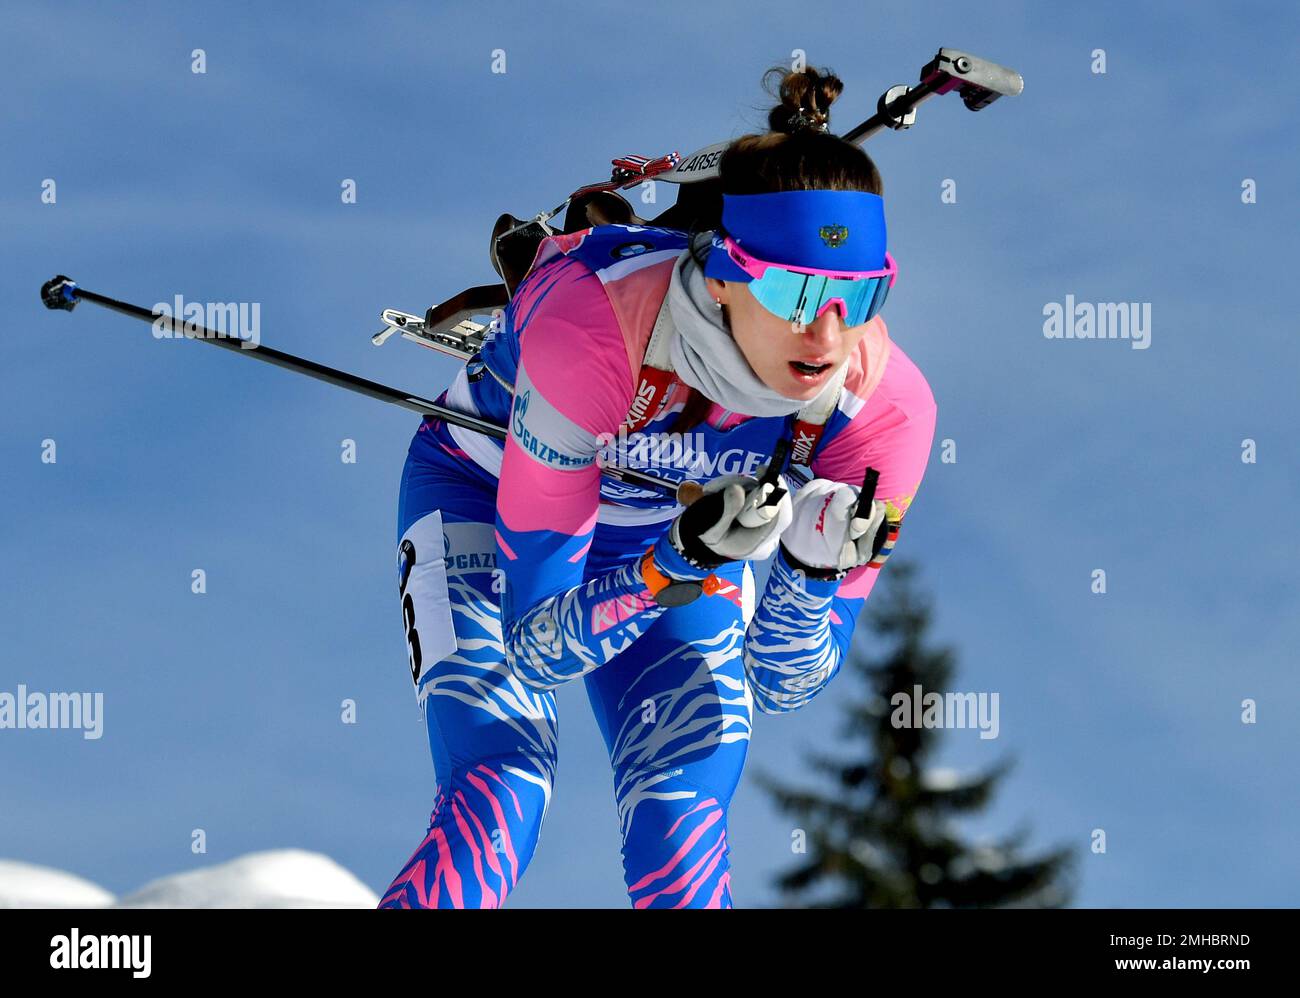 Russias Svetlana Mironova competes during the womens 10 km pursuit competition at the Biathlon World Cup in Hochfilzen, Austria, Sunday, Dec